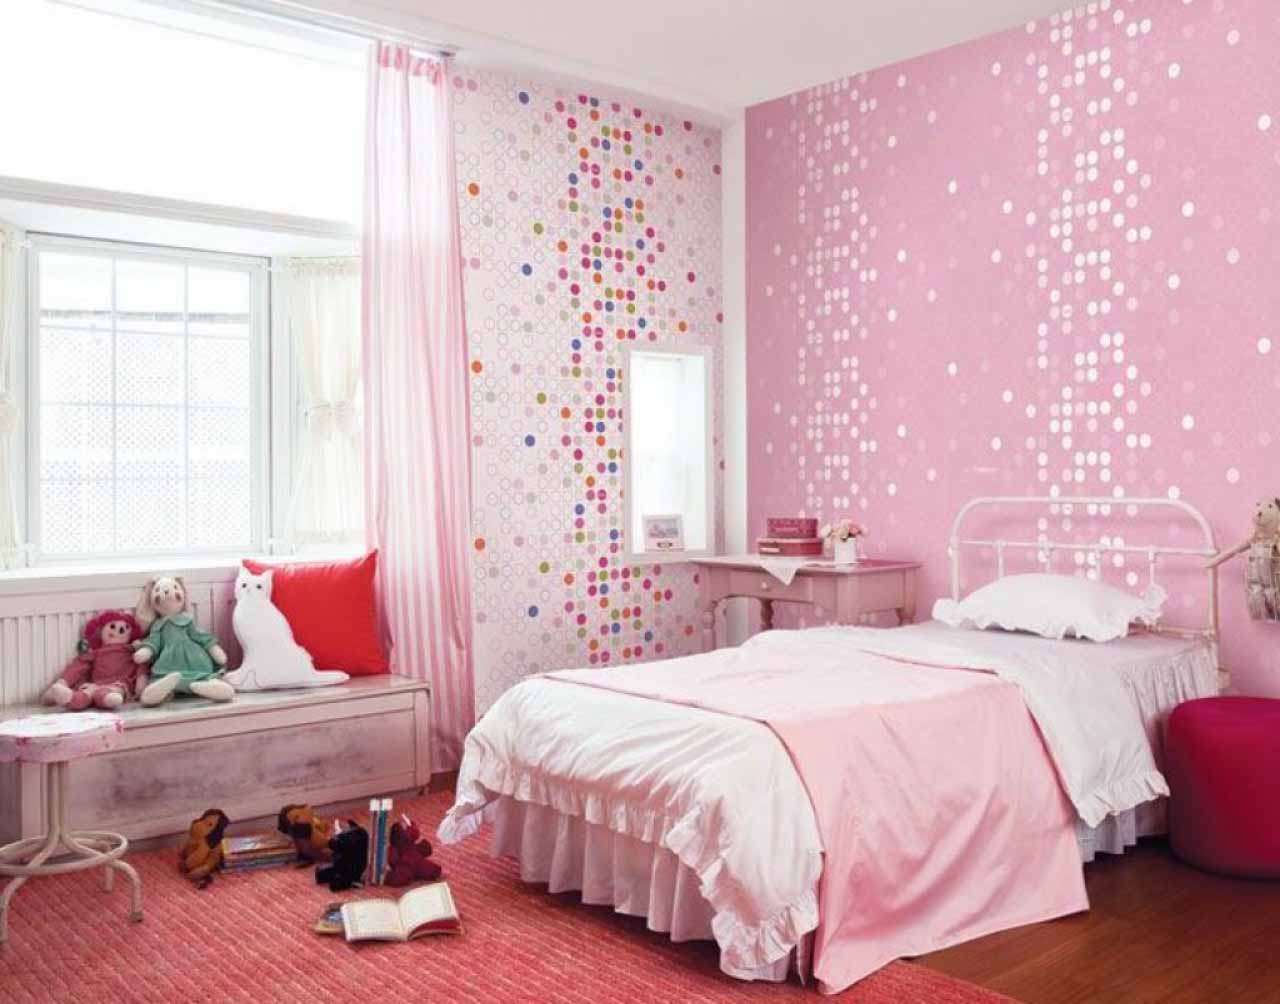 🎀 Design a Completely Pink Bedroom and We’ll Guess How Old You Are Kid's room 13